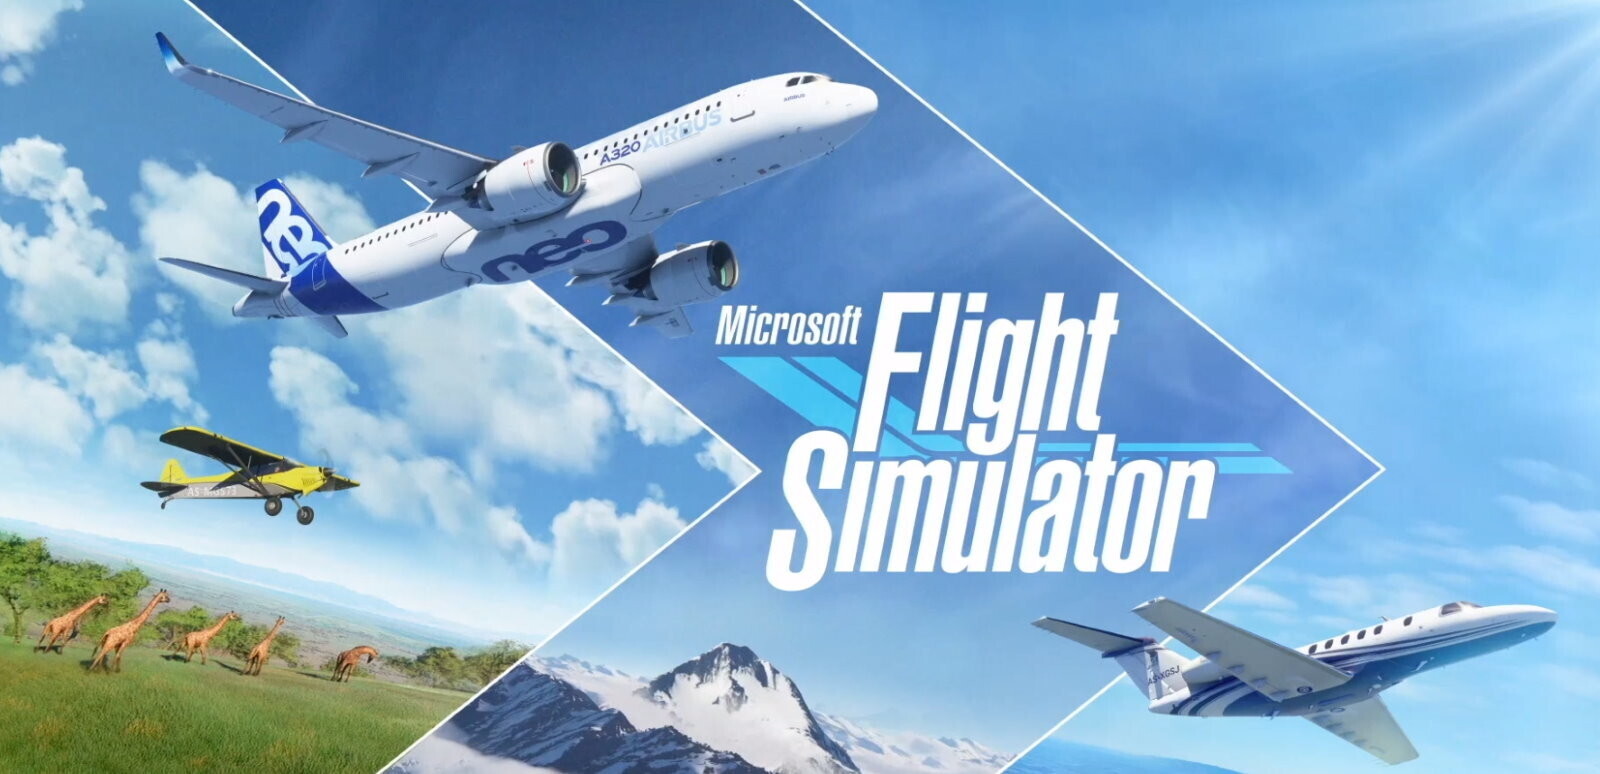 Tom Warren on X: Microsoft Flight Simulator is launching on Xbox Cloud  Gaming (xCloud) today. It will allow Xbox One owners to access the game for  the first time, or for people